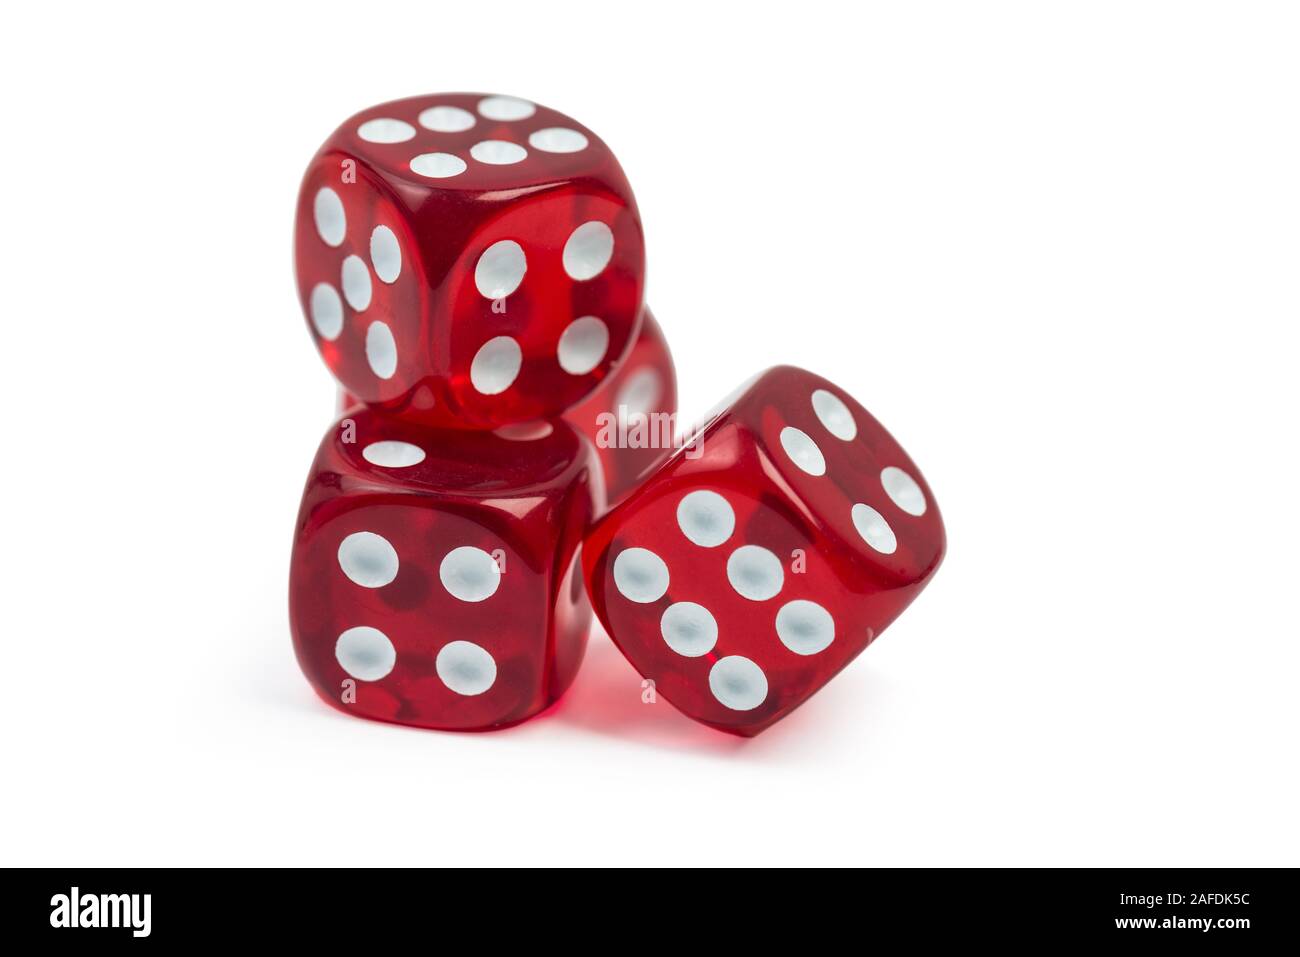 Group of red gambling casino dice isolated on white with clipping path Stock Photo